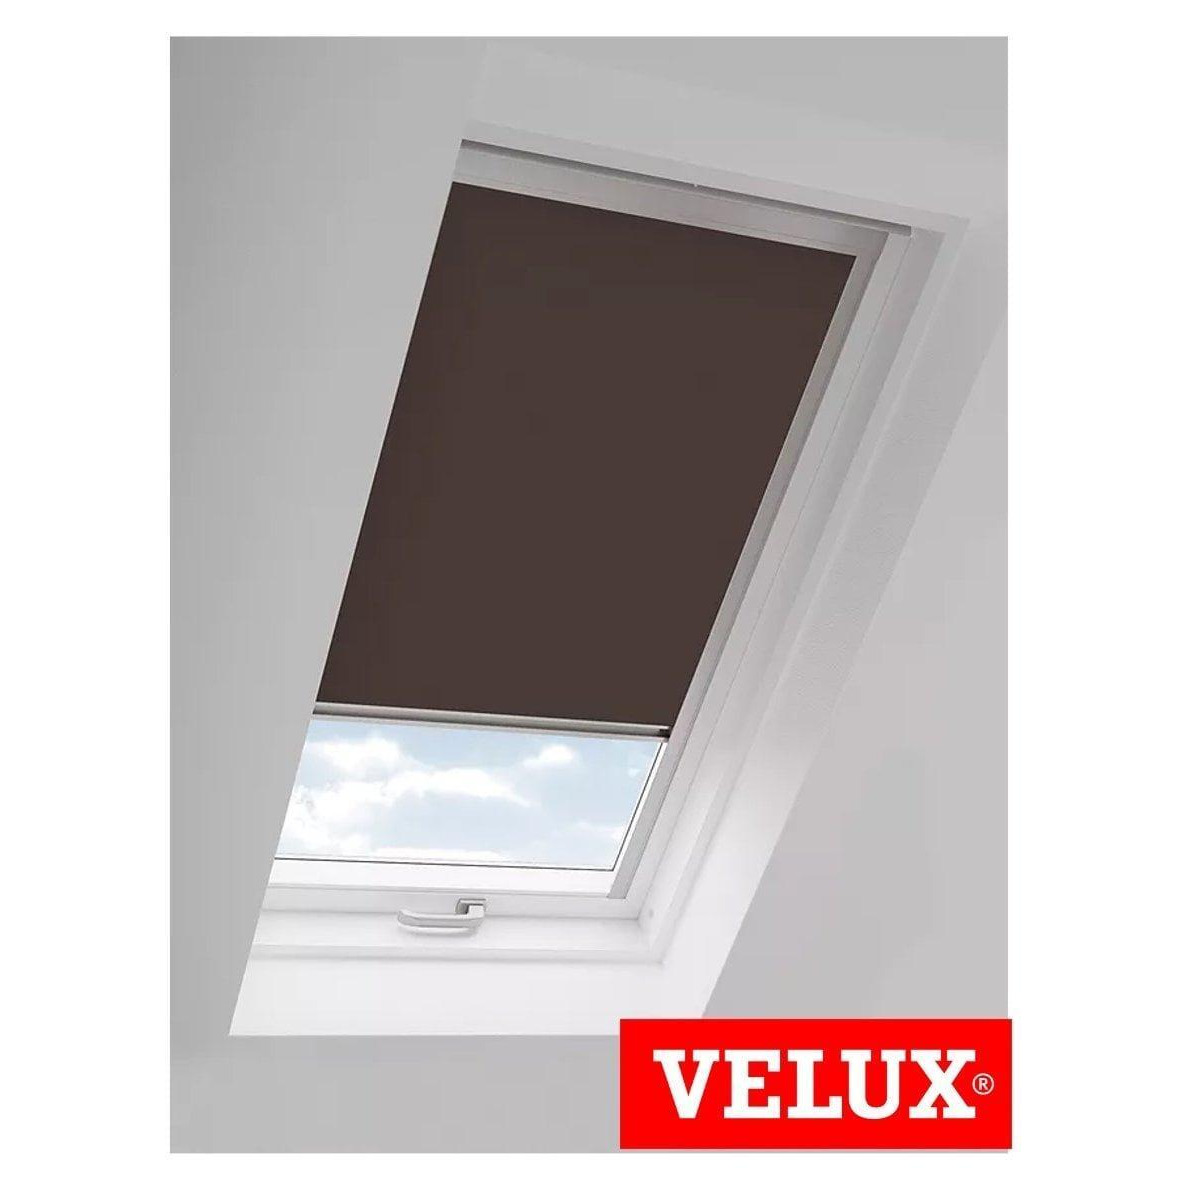 Henna Brown Thermal out Skylight Roller Blinds (Velux Roof Windows G Codes) - image 1